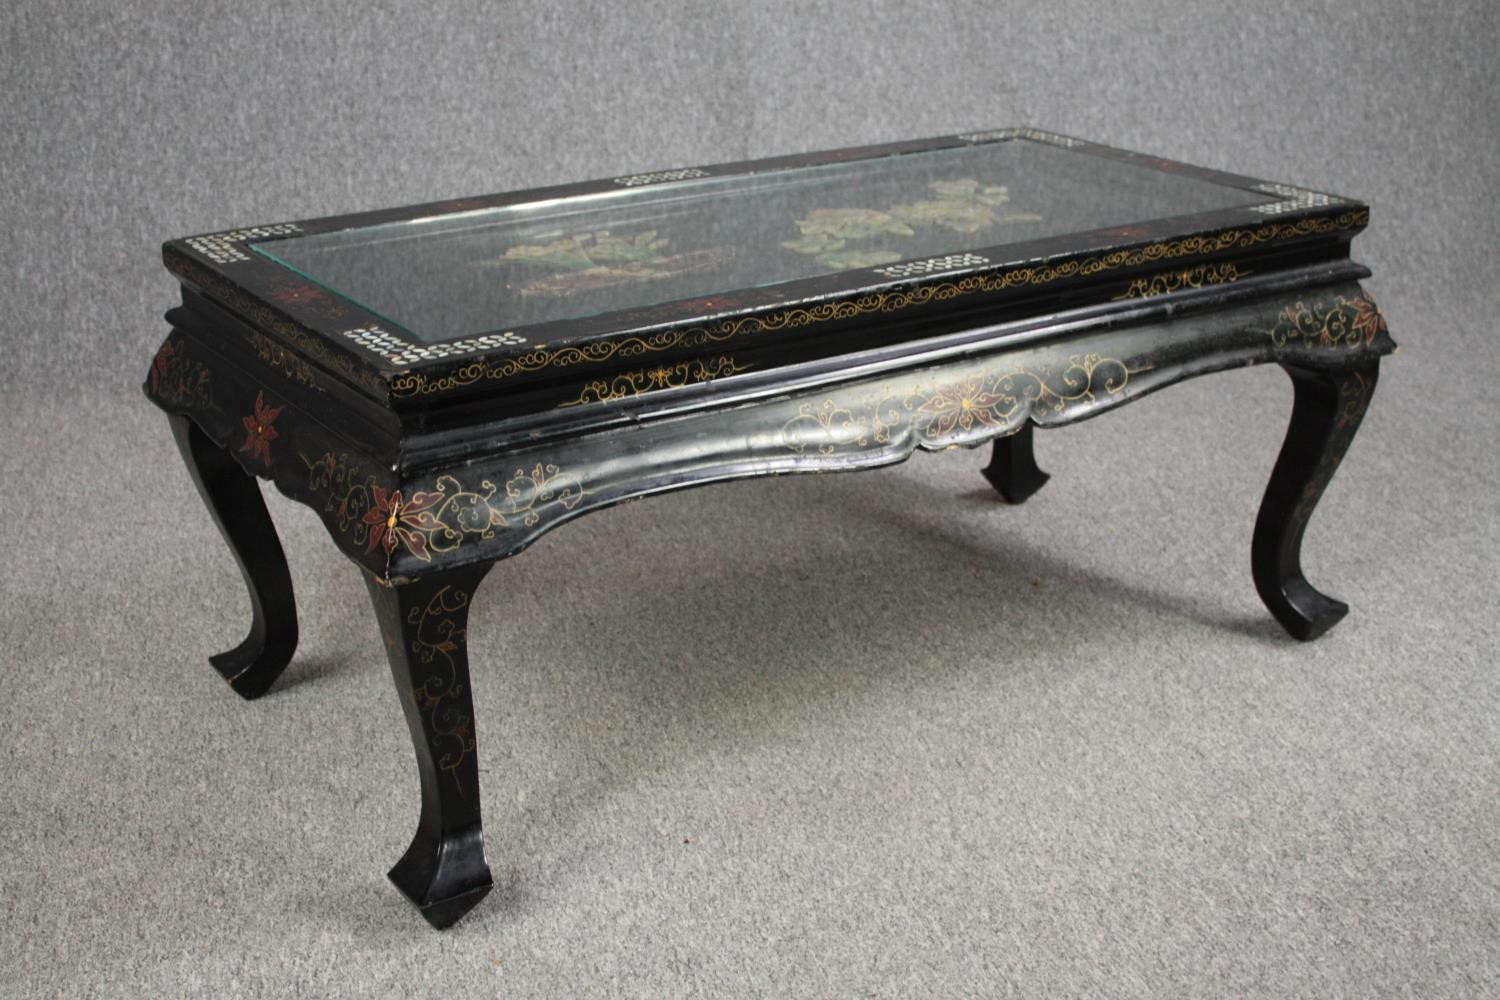 A Chinese style coffee table with carved soapstone floral decoration and inlaid mother of pearl - Image 4 of 6